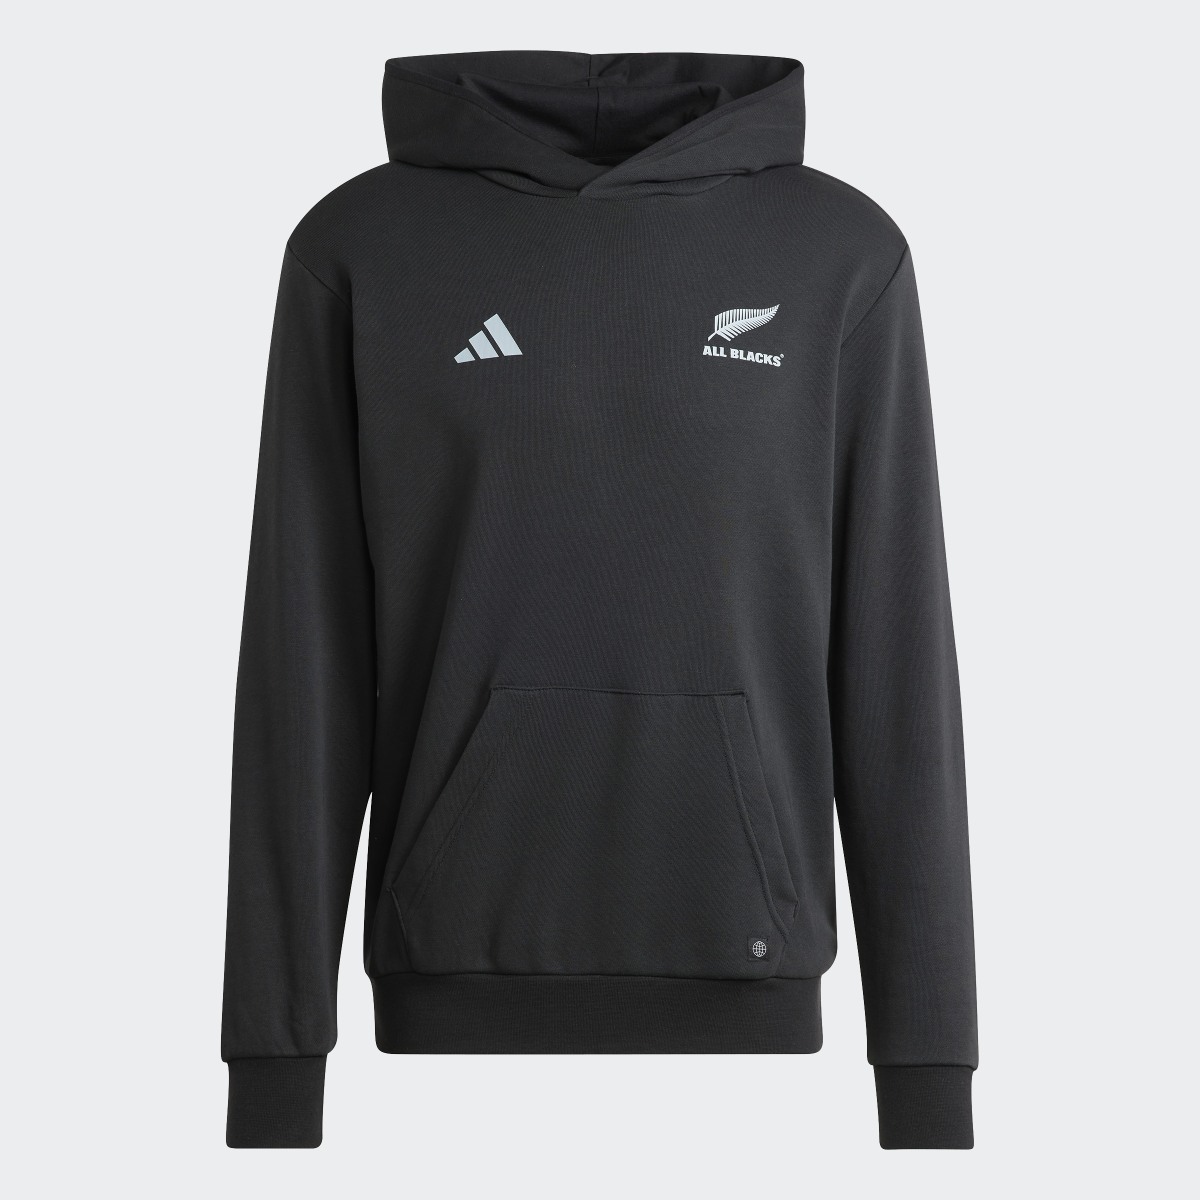 Adidas All Blacks Rugby Supporters Hoodie. 5